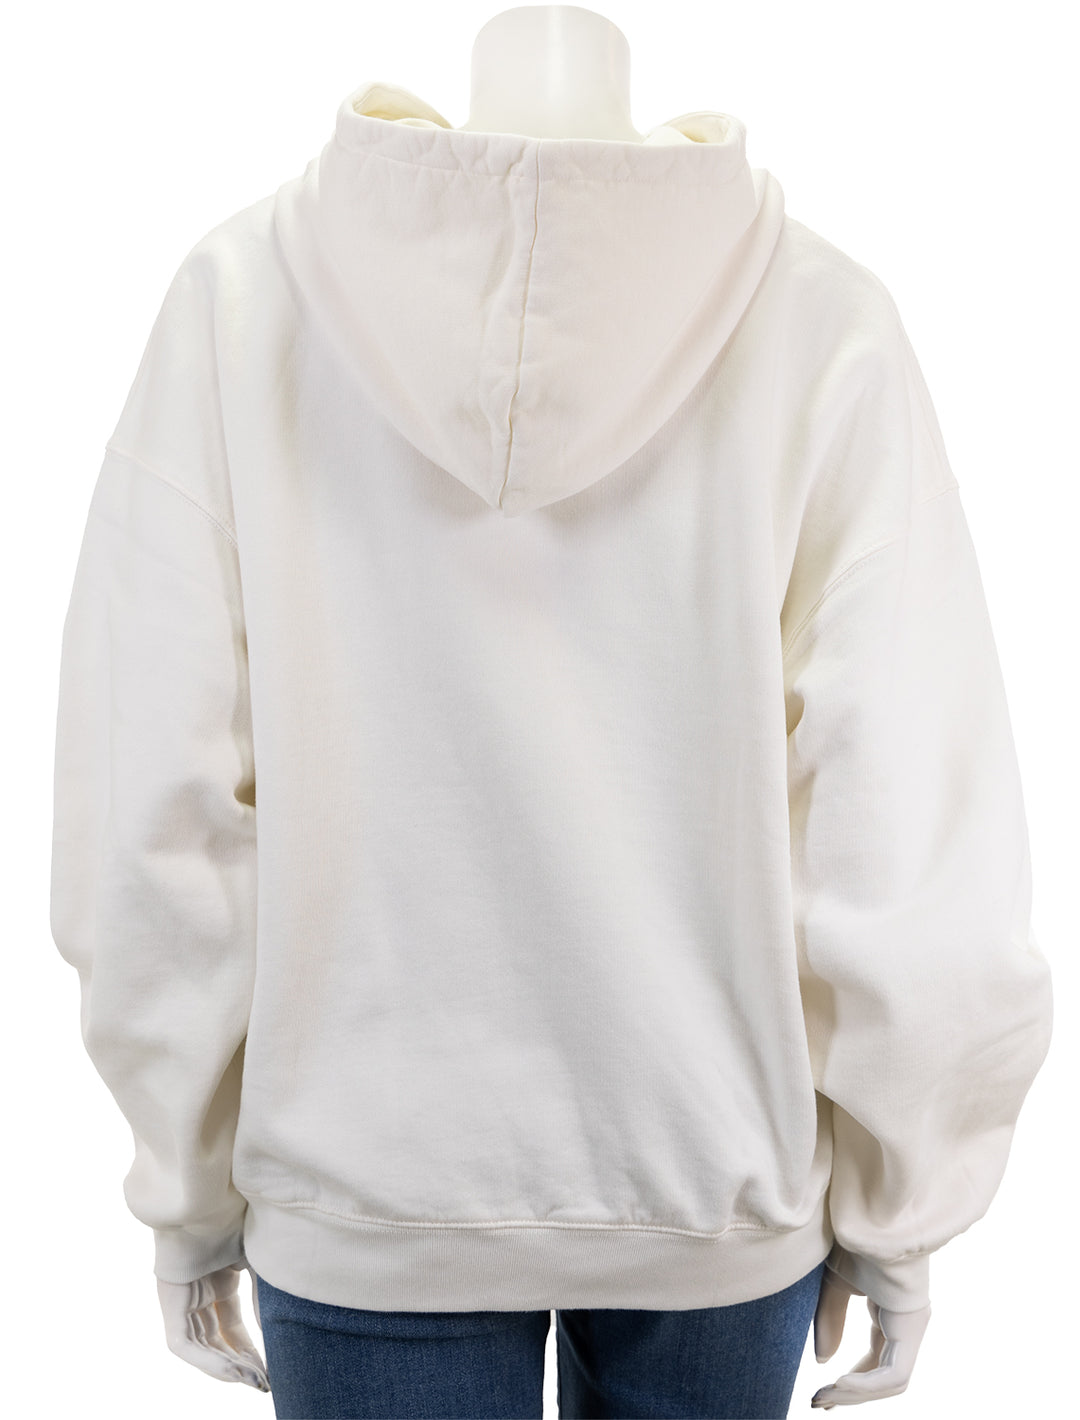 Back view of Anine Bing's harvey sweatshirt in ivory and sage.